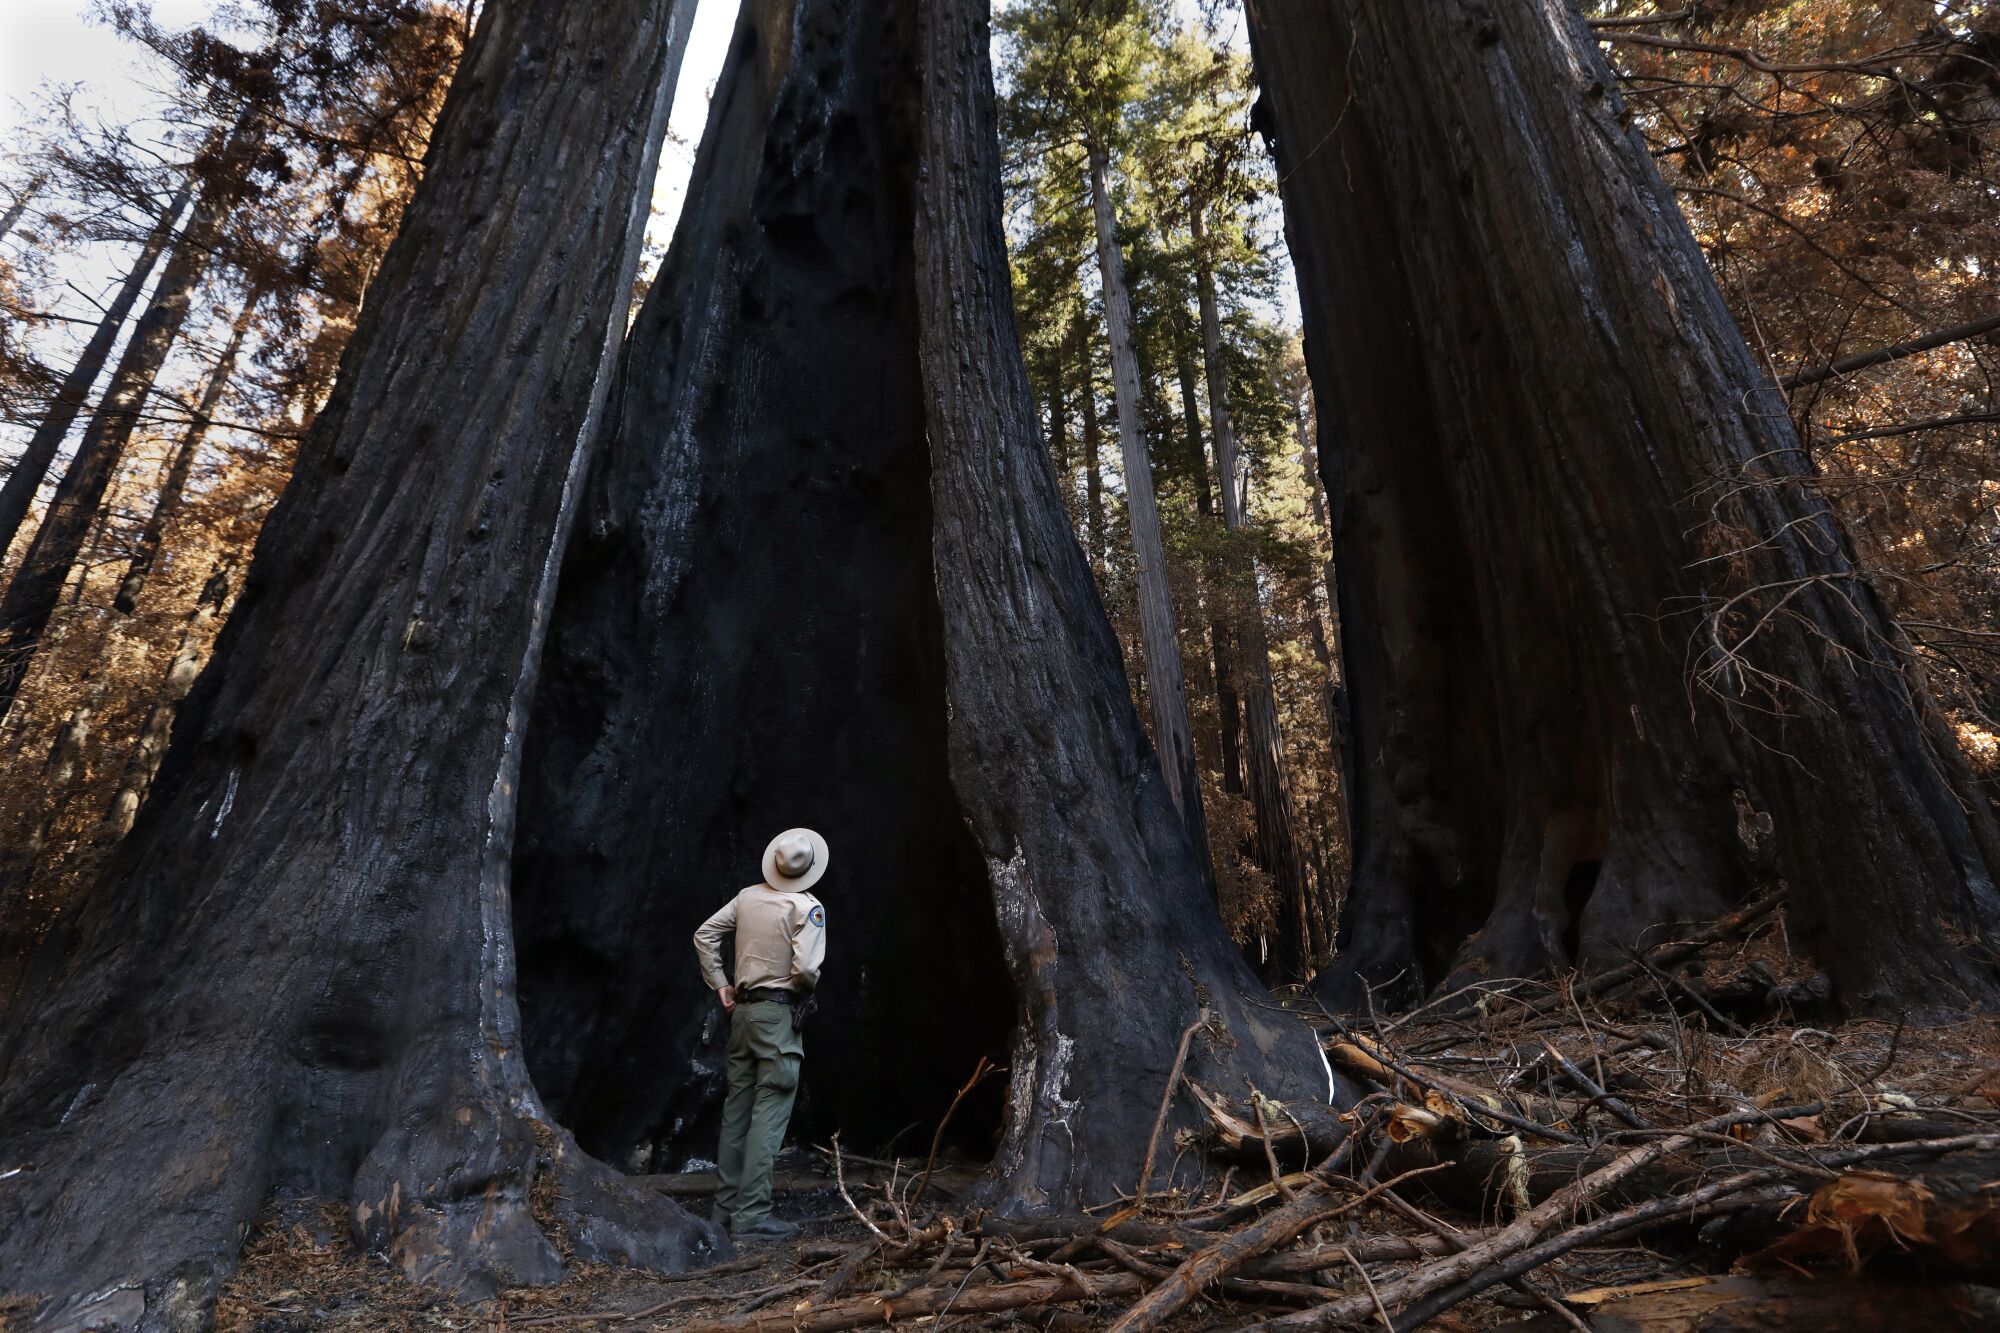 A state parks ranger stands alongside, and is dwarfed by, a charred redwood tree.